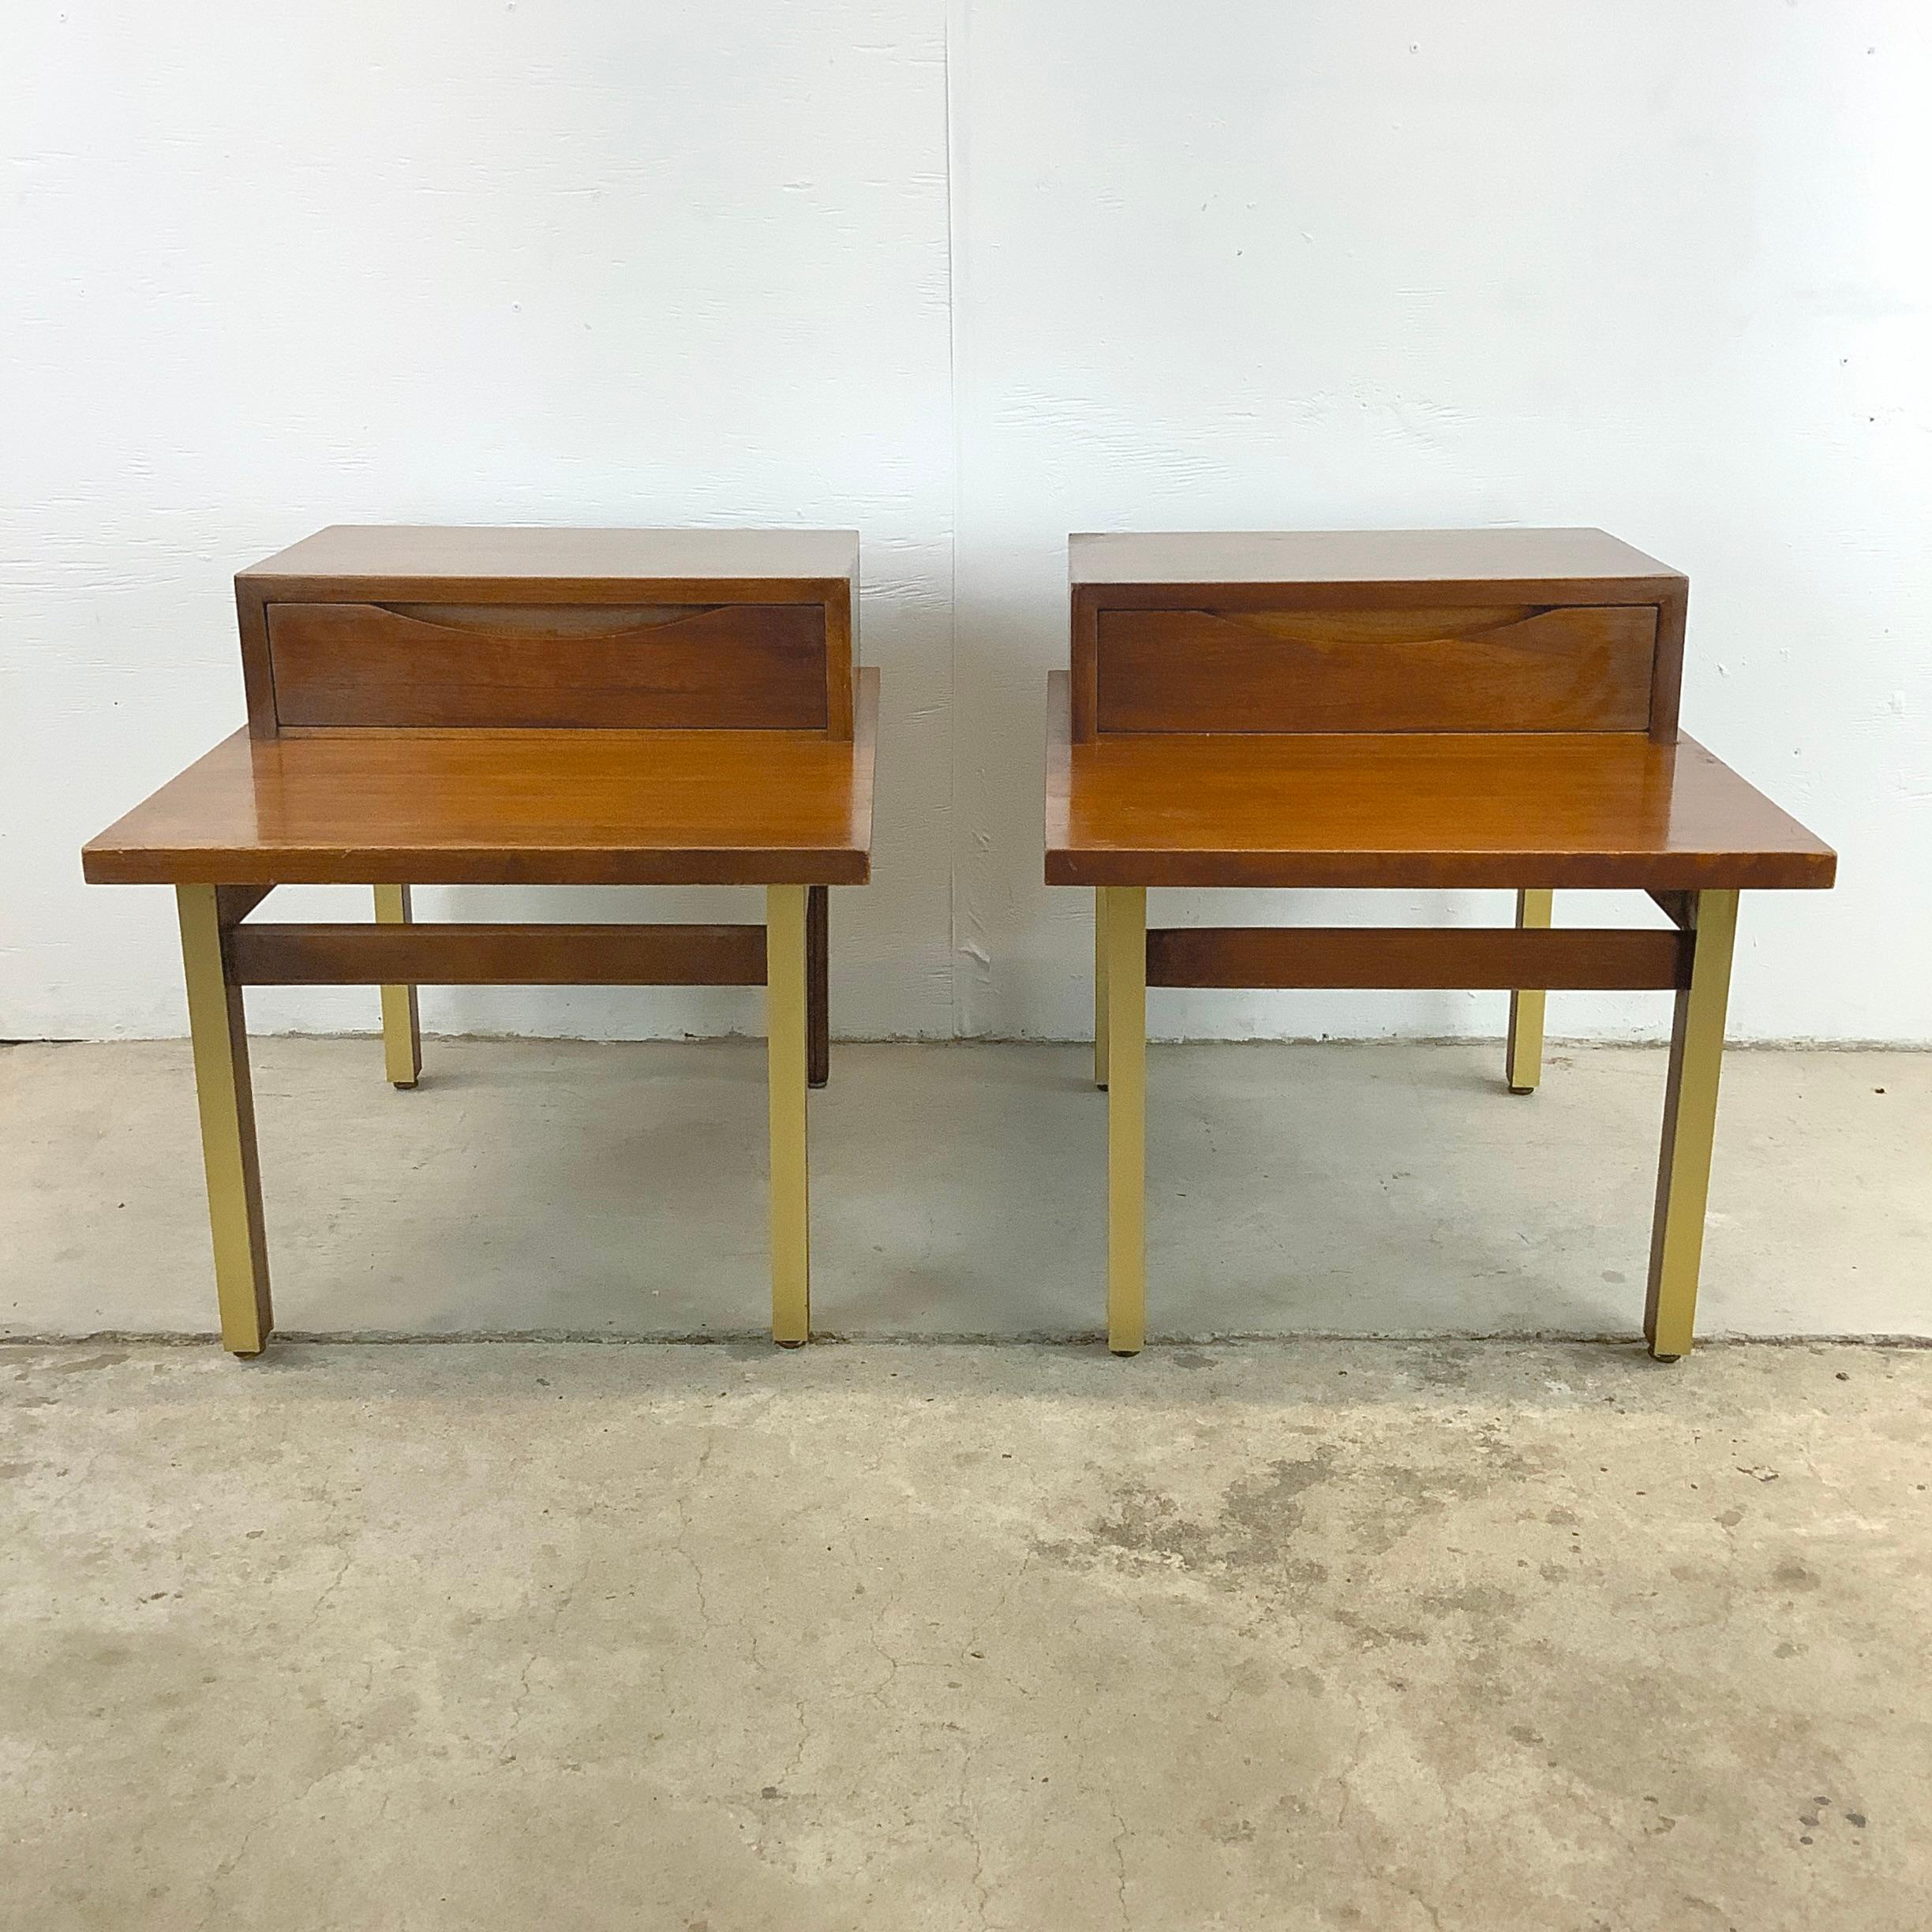 Enjoy the timeless allure of mid-century modern design with this exquisite pair of Mid-Century Modern Step Side Tables/Nightstands by American of Martinsville. These tables aren't just functional pieces; they're a window into an era where form and